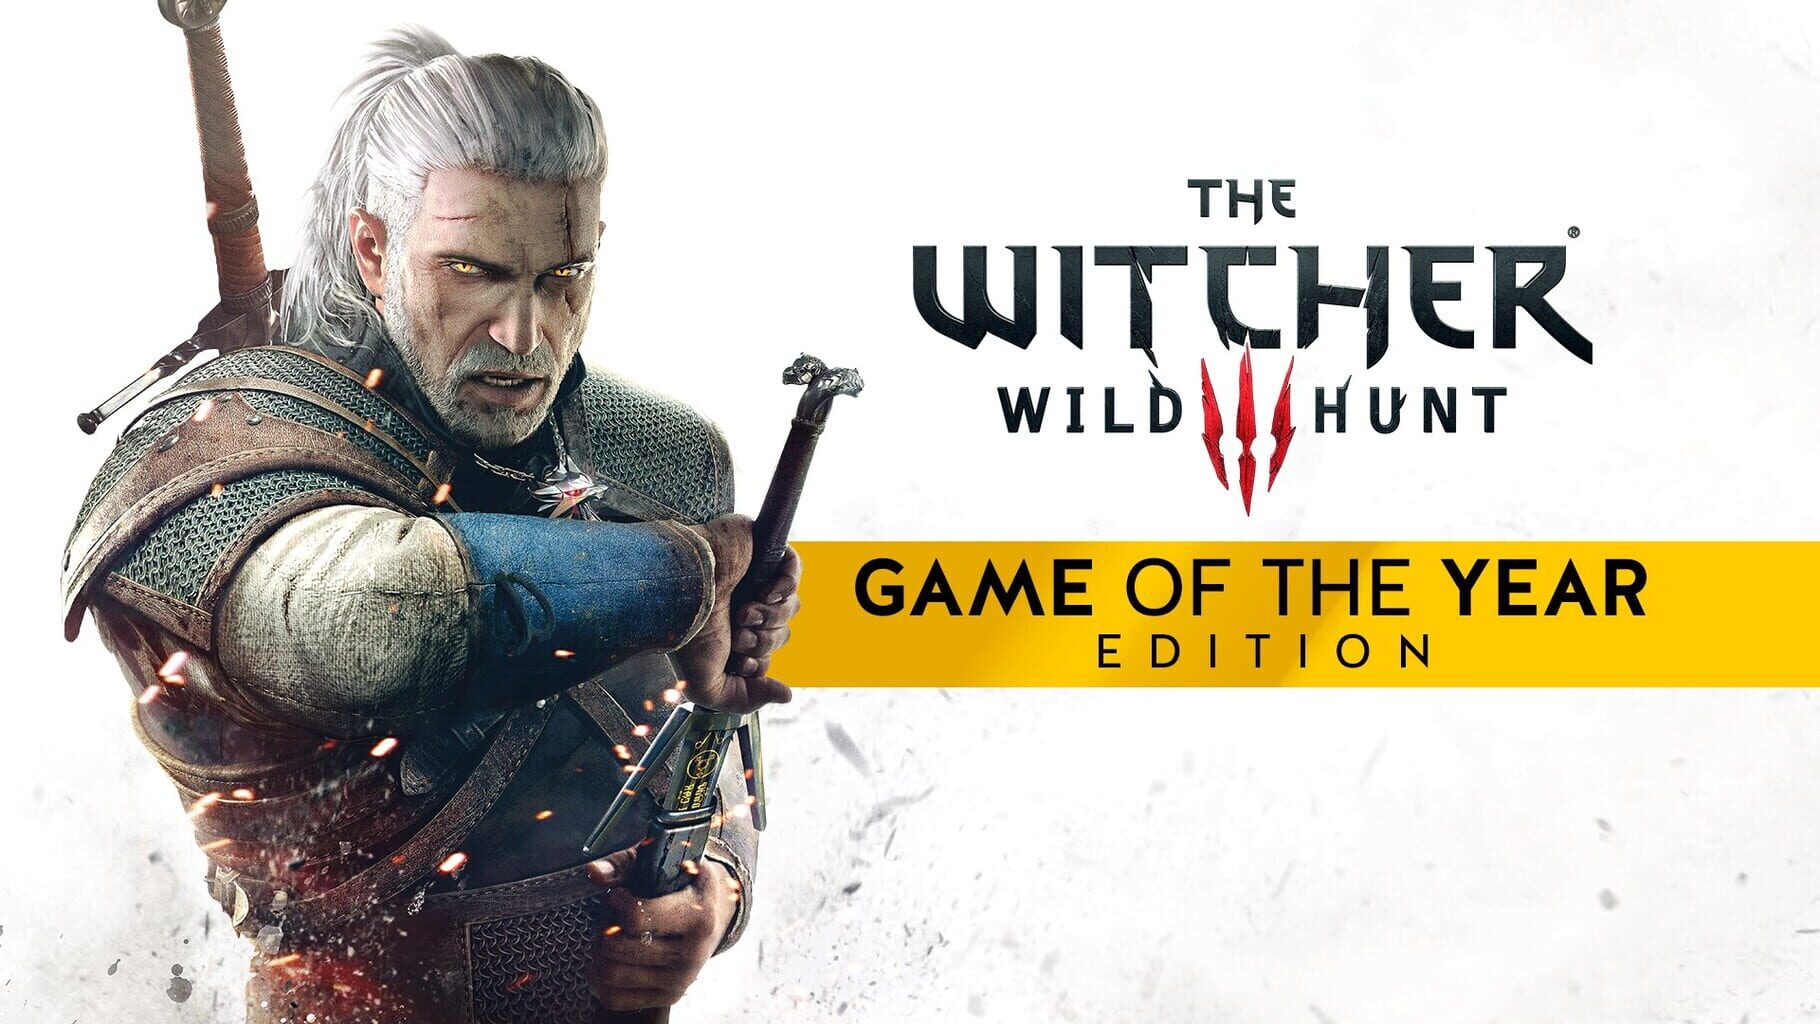 Arte - The Witcher 3: Wild Hunt - Game of the Year Edition